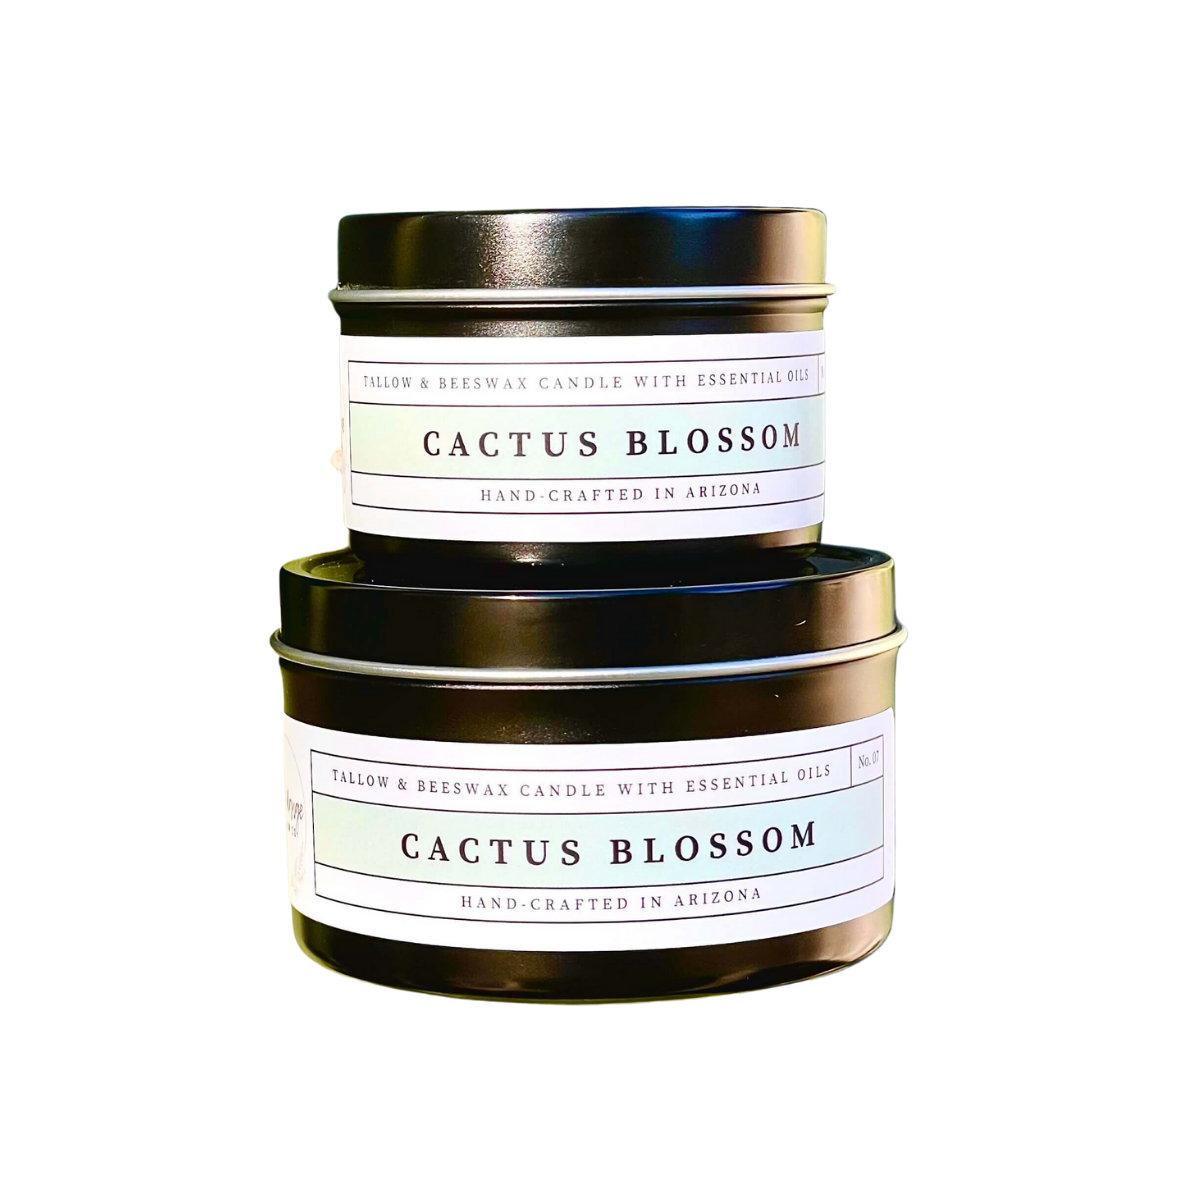 Cactus Blossom Tallow and Beeswax Candle